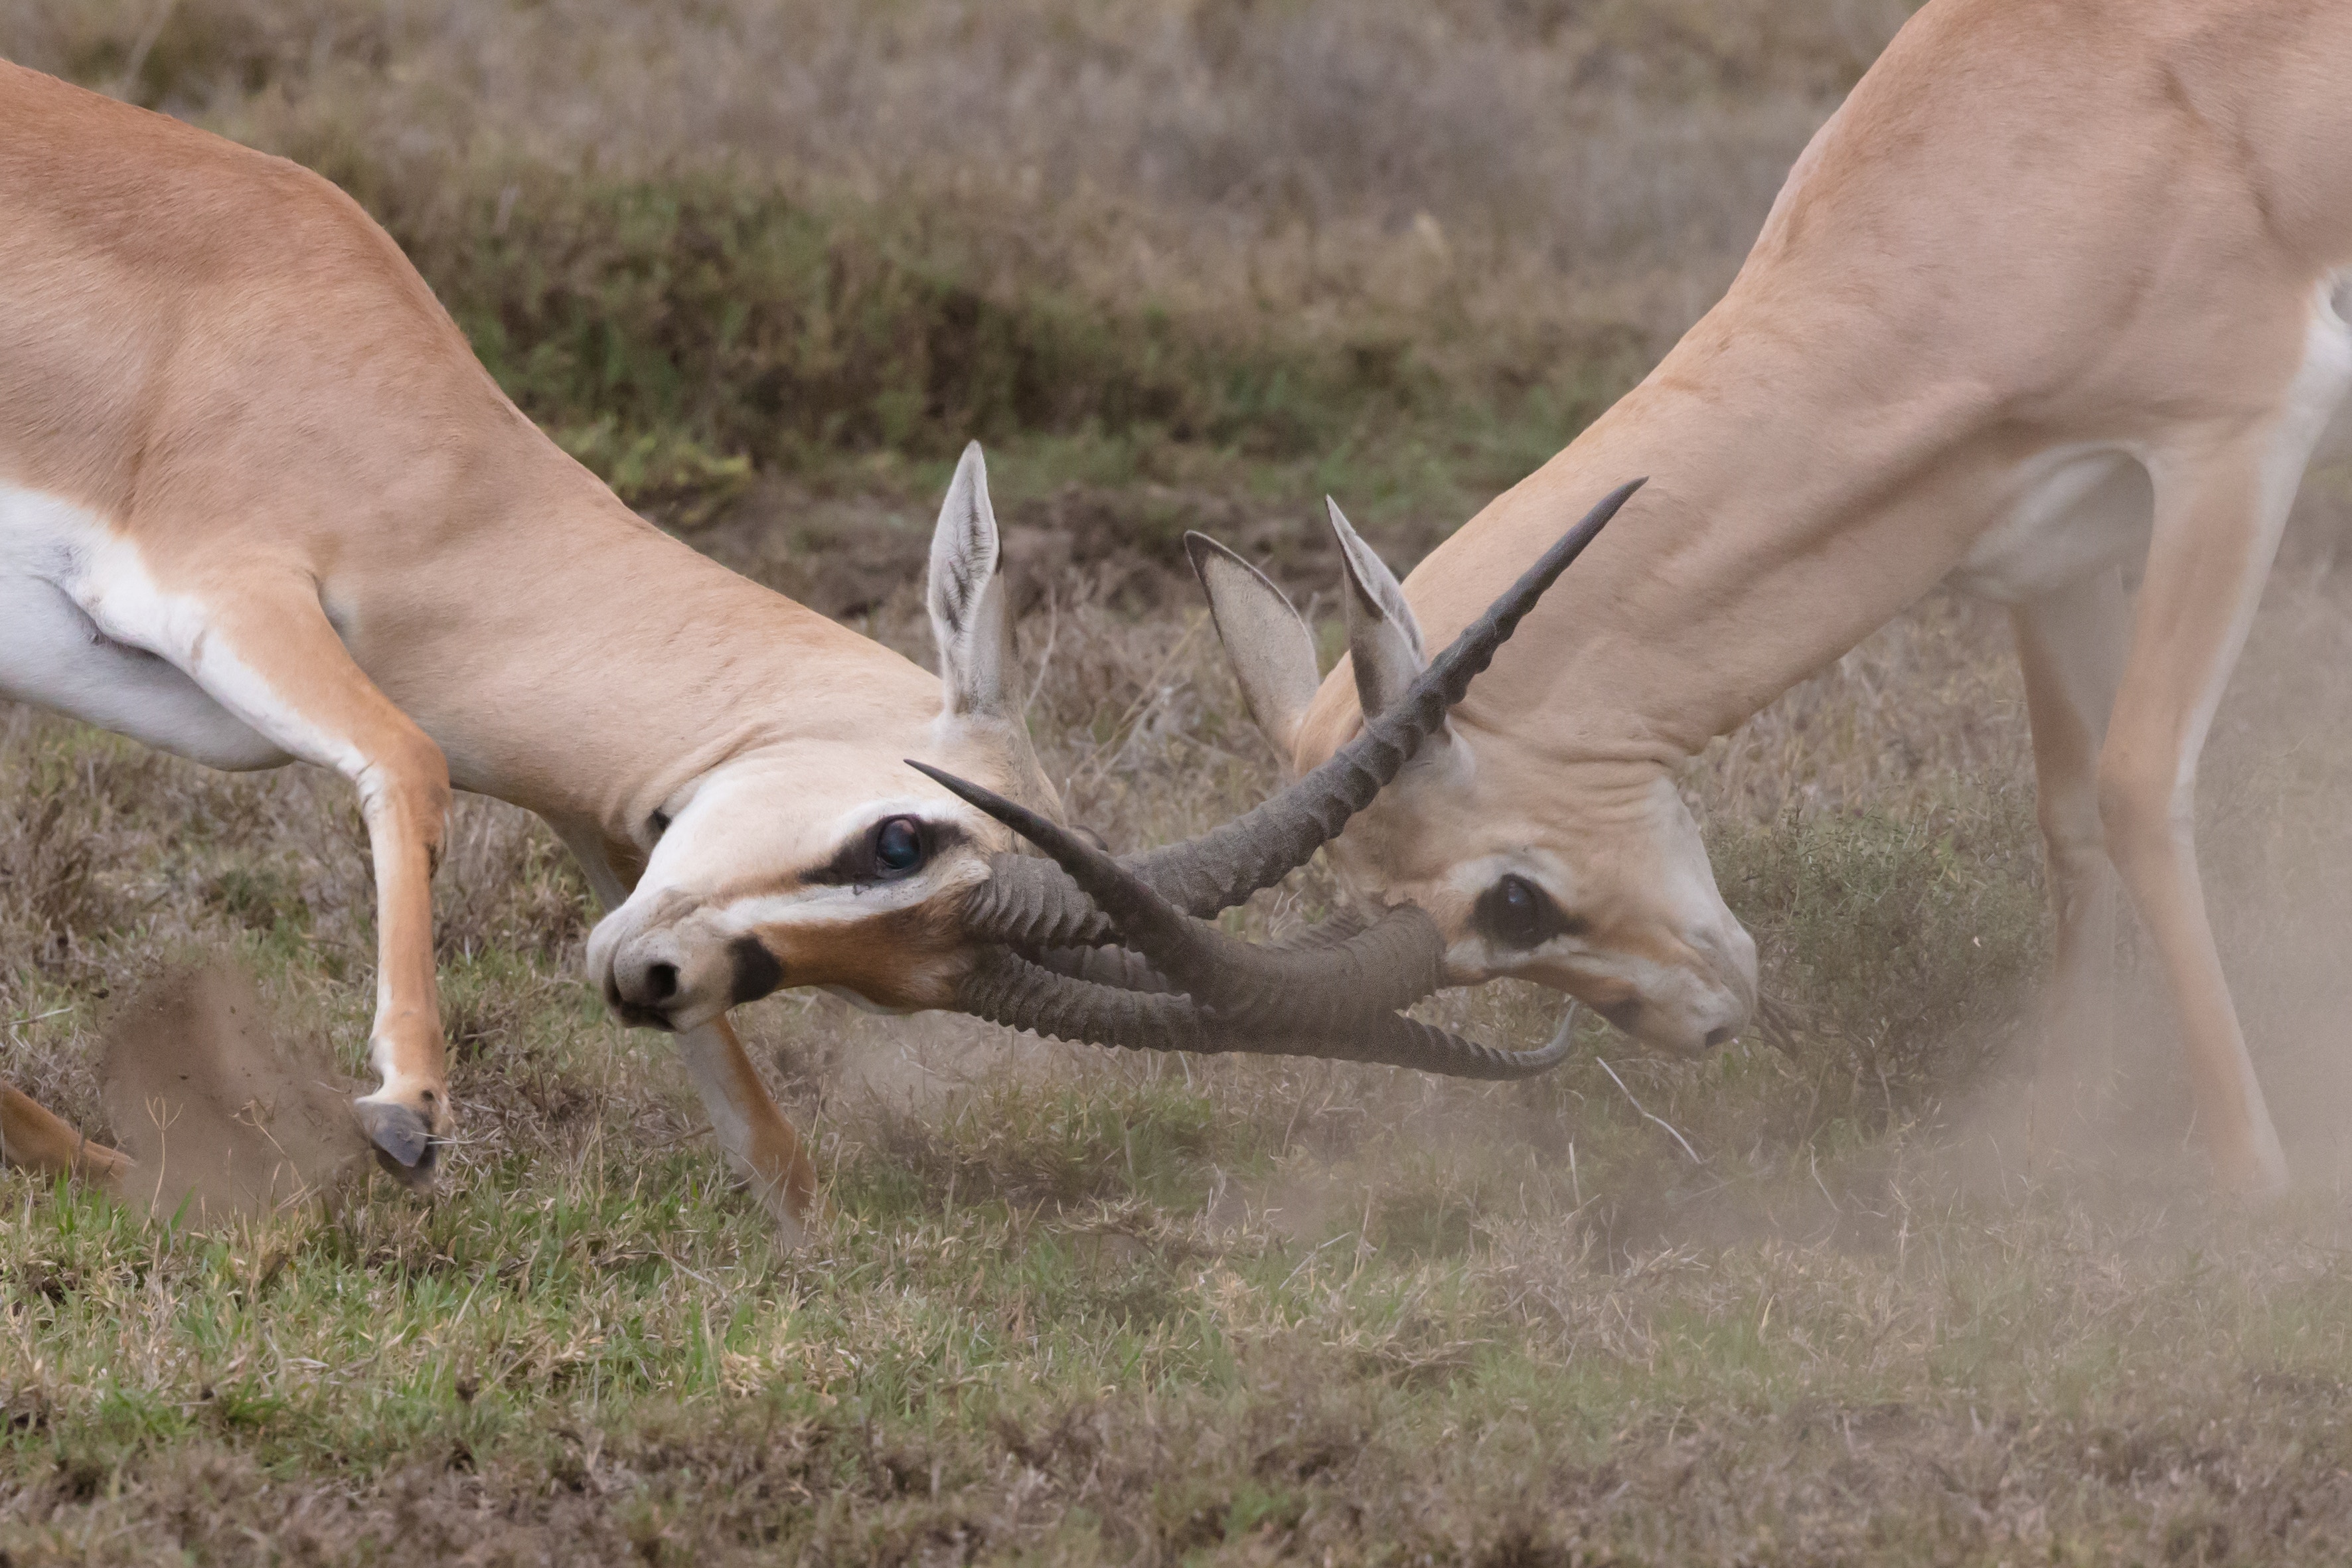 Image of two gazelles with horns locked and in conflict